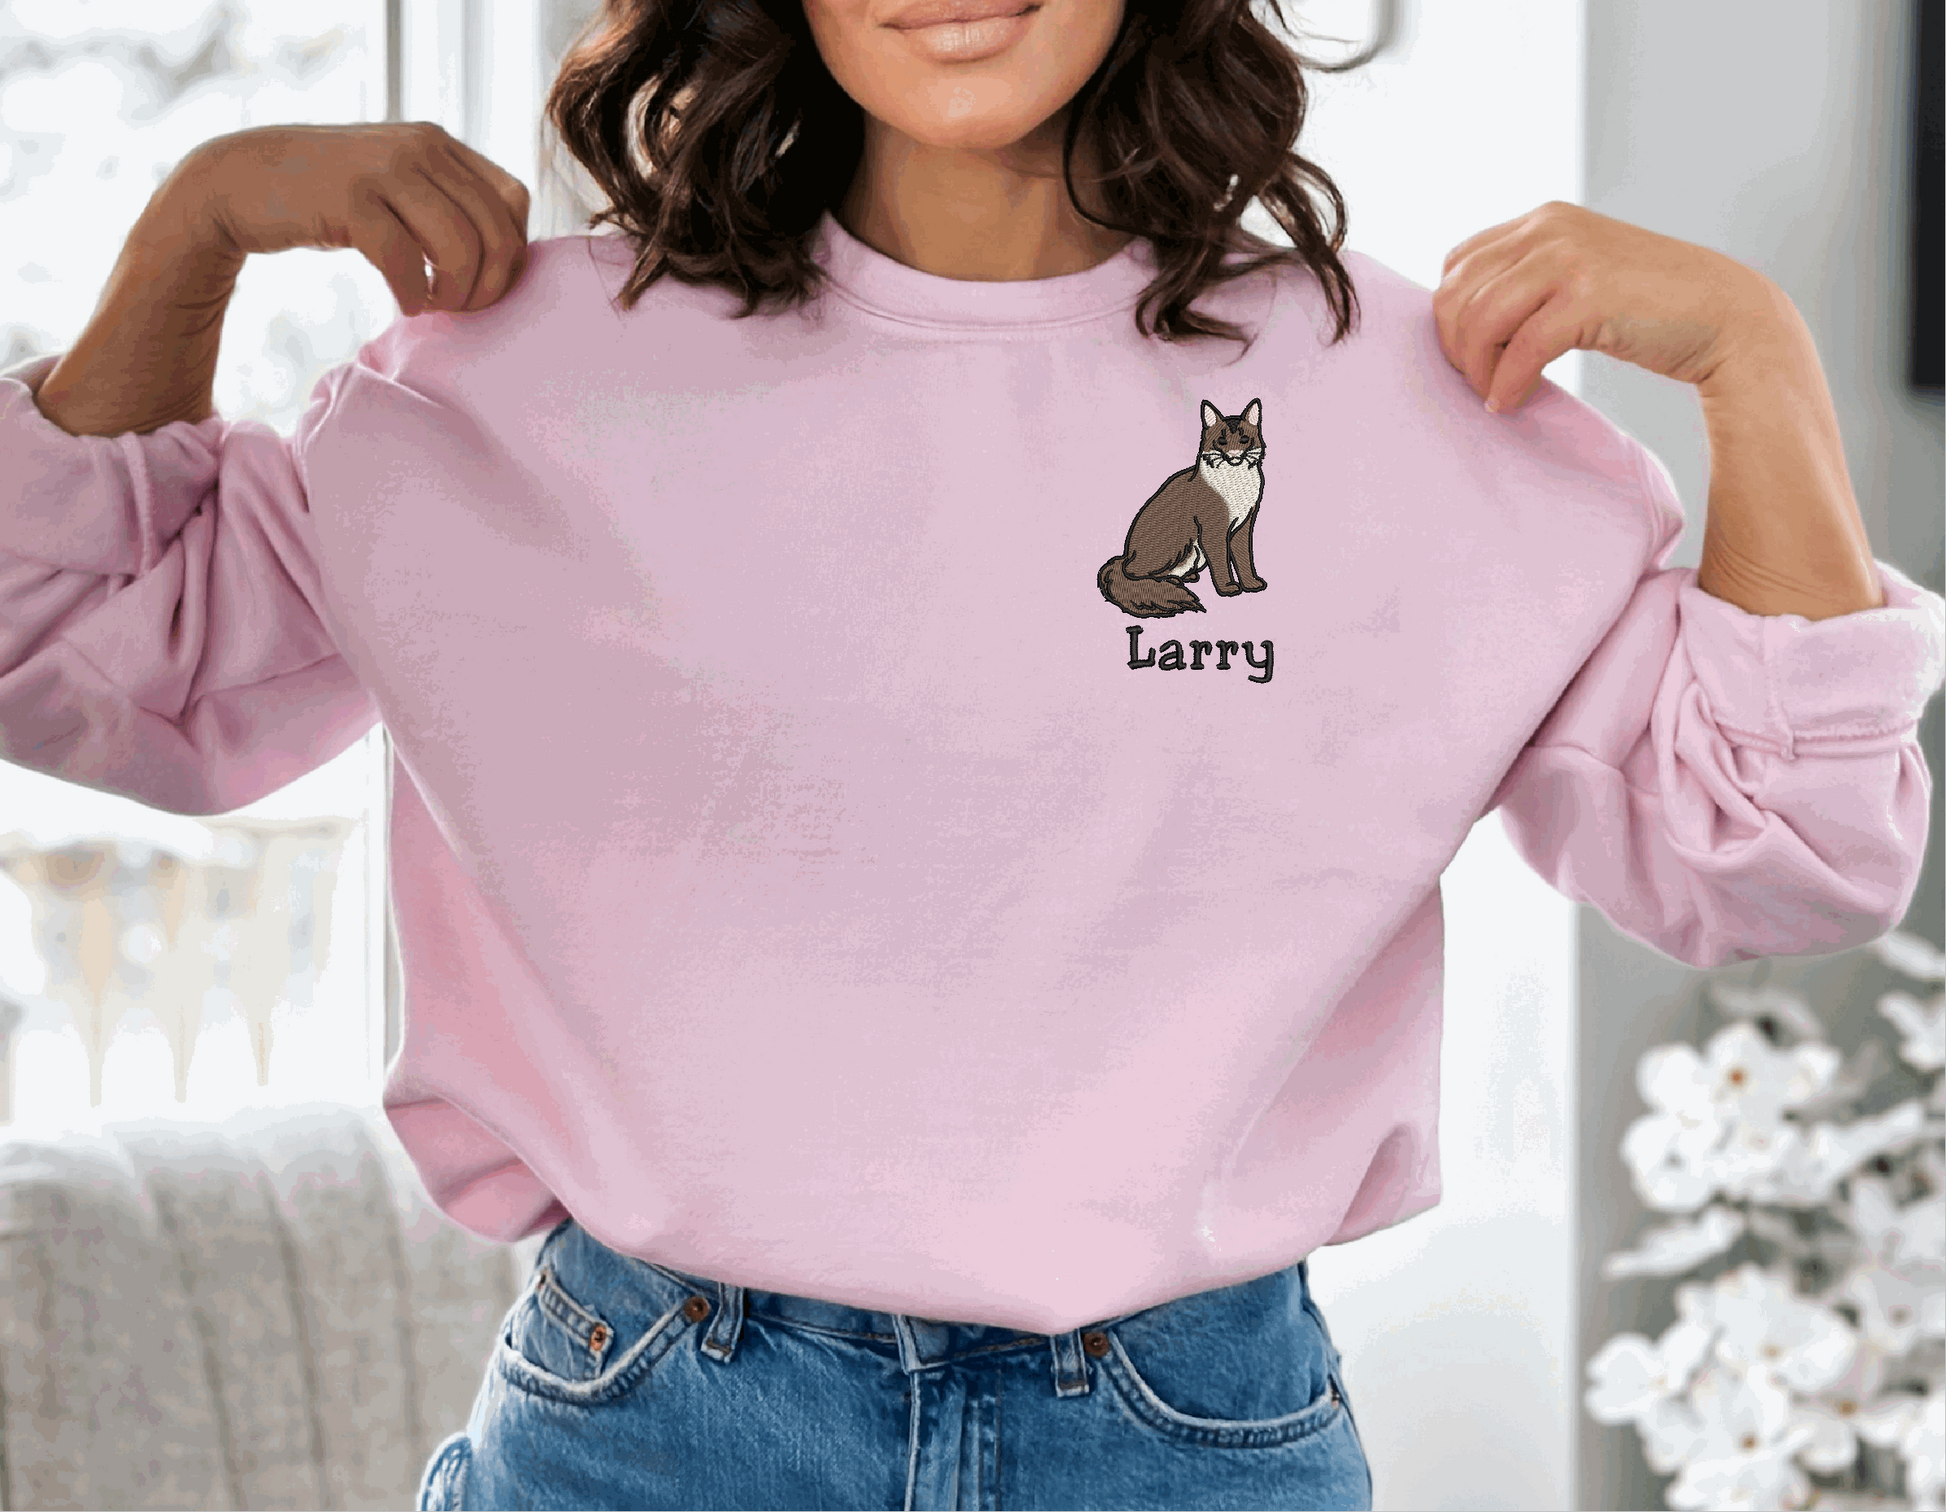 a woman wearing a pink sweater with a cat on it